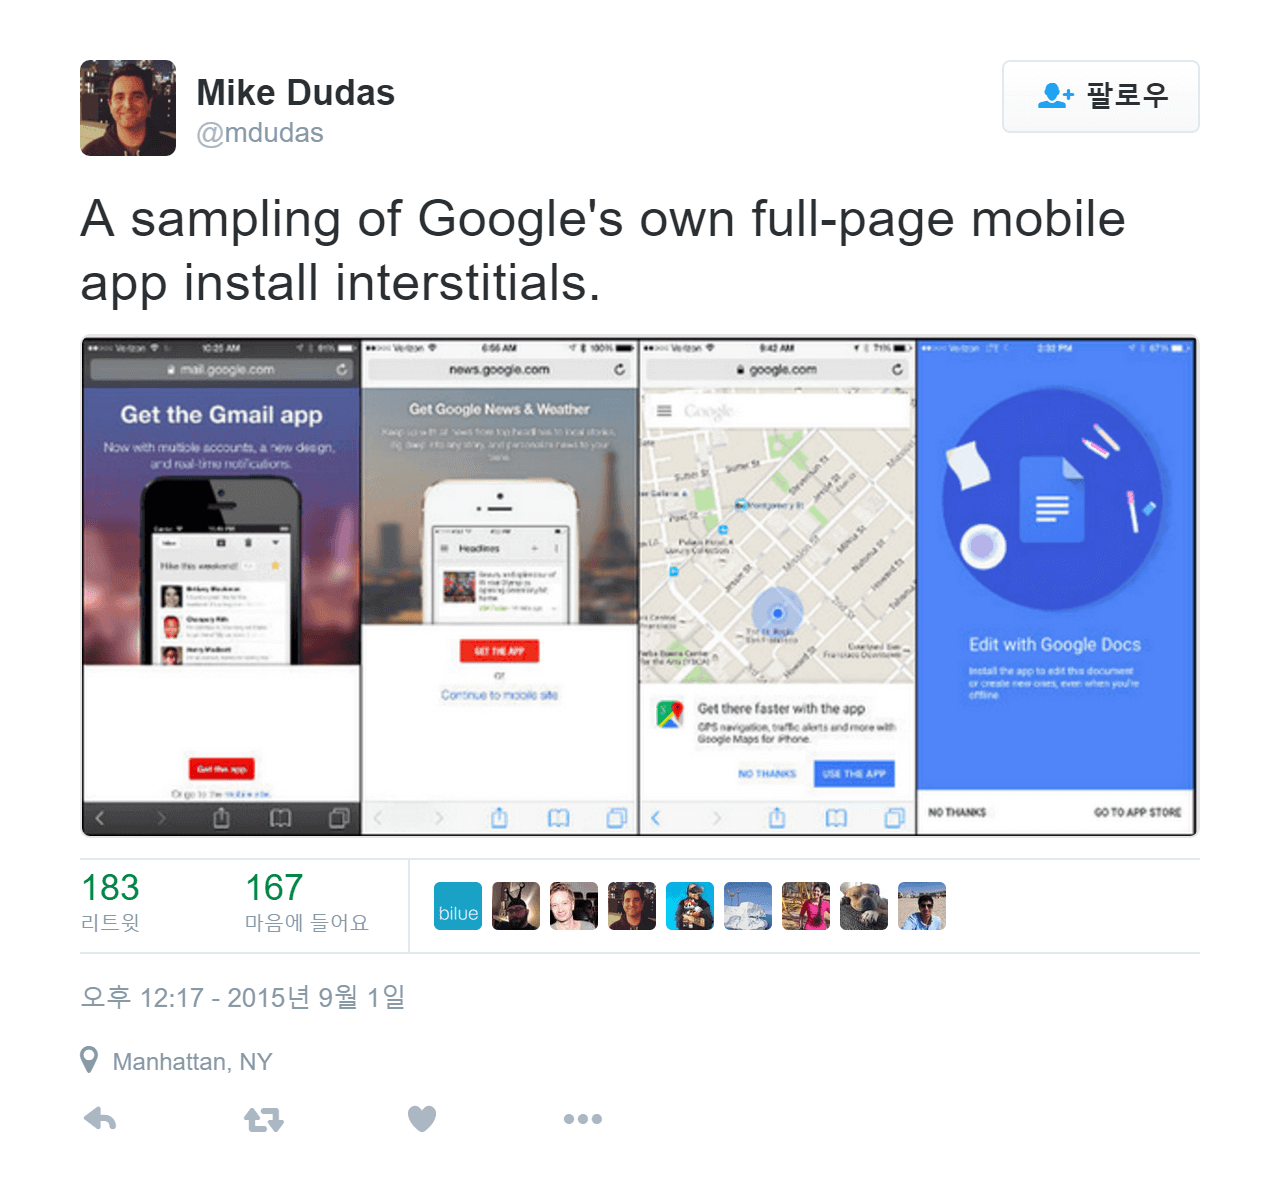 Tweet with text “A sampling of Google's own full-page mobile app install interstitials.” Includes mobile browsers screen shots each of Gmail, Google News, Google Maps, and Google Docs, each with a partial or total overlay interstitial promoting the corresponding app.